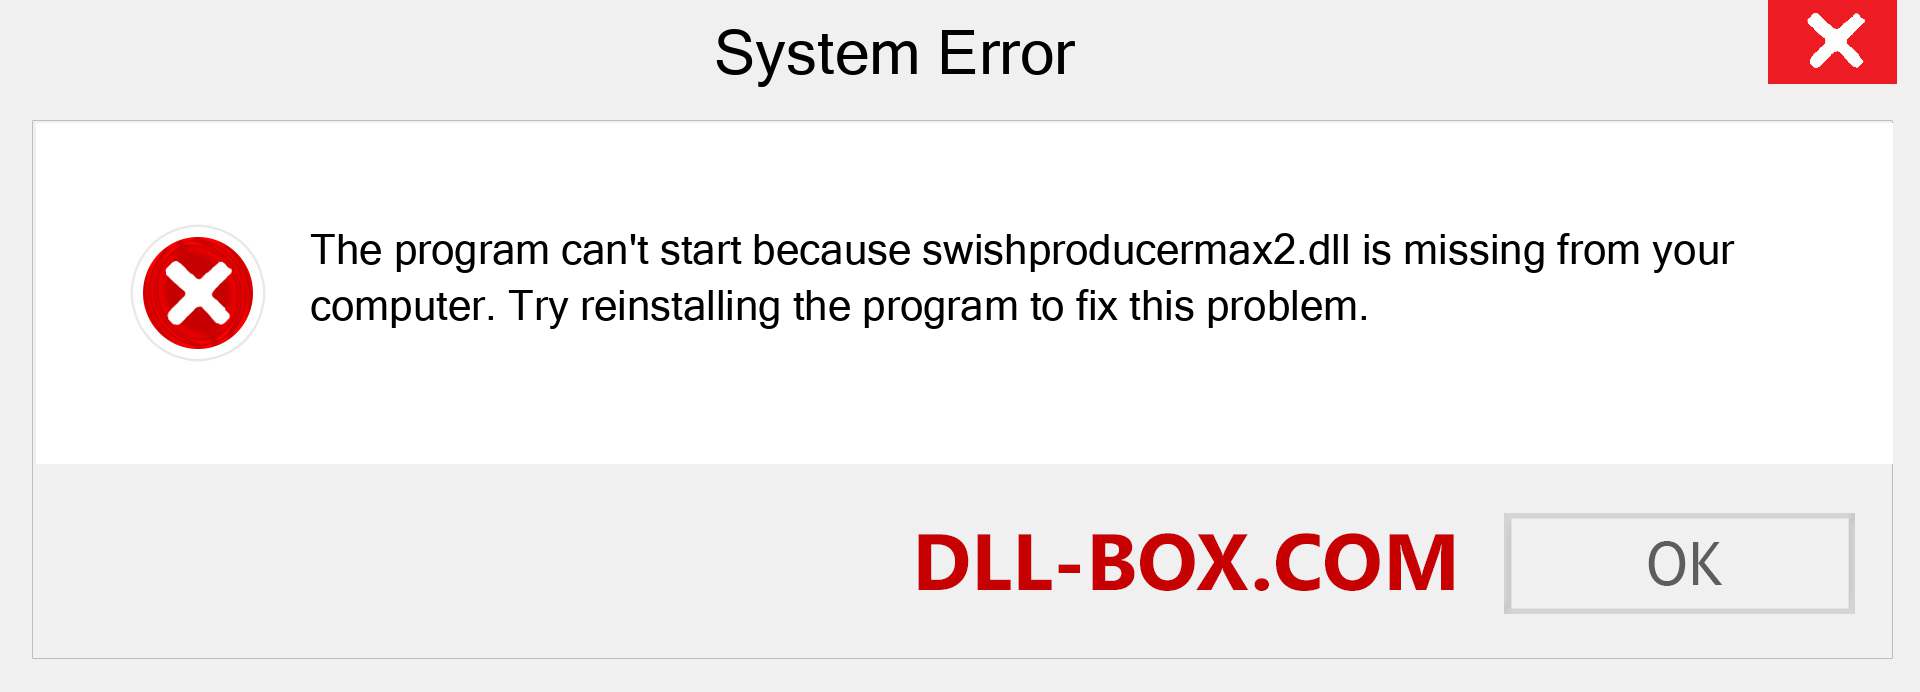  swishproducermax2.dll file is missing?. Download for Windows 7, 8, 10 - Fix  swishproducermax2 dll Missing Error on Windows, photos, images